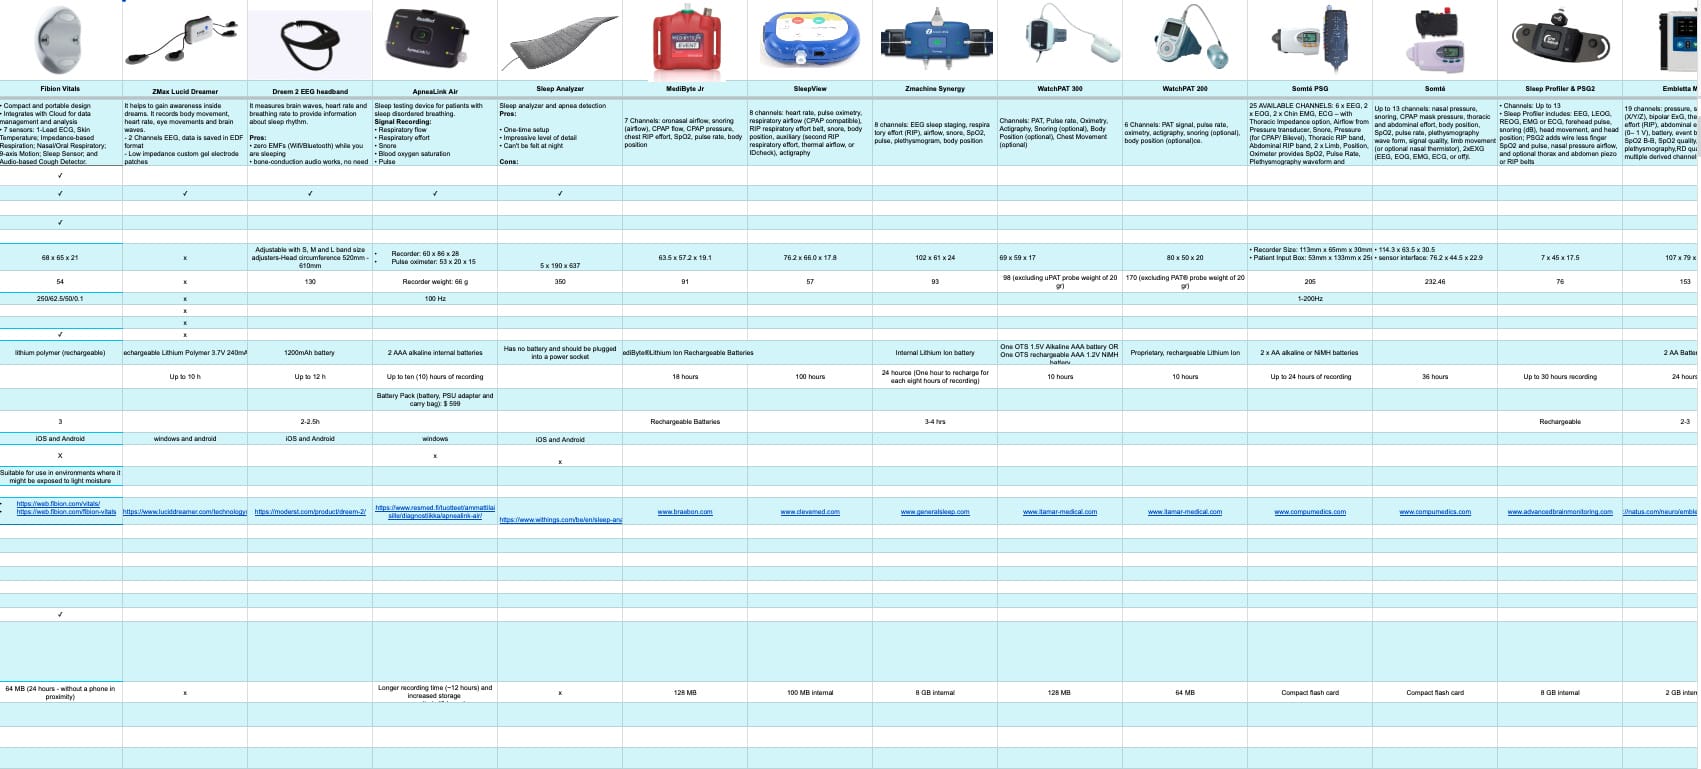 Spreadsheet comparing specifications and features of various camera models, highlighted and annotated for clarity in sleep comparison.